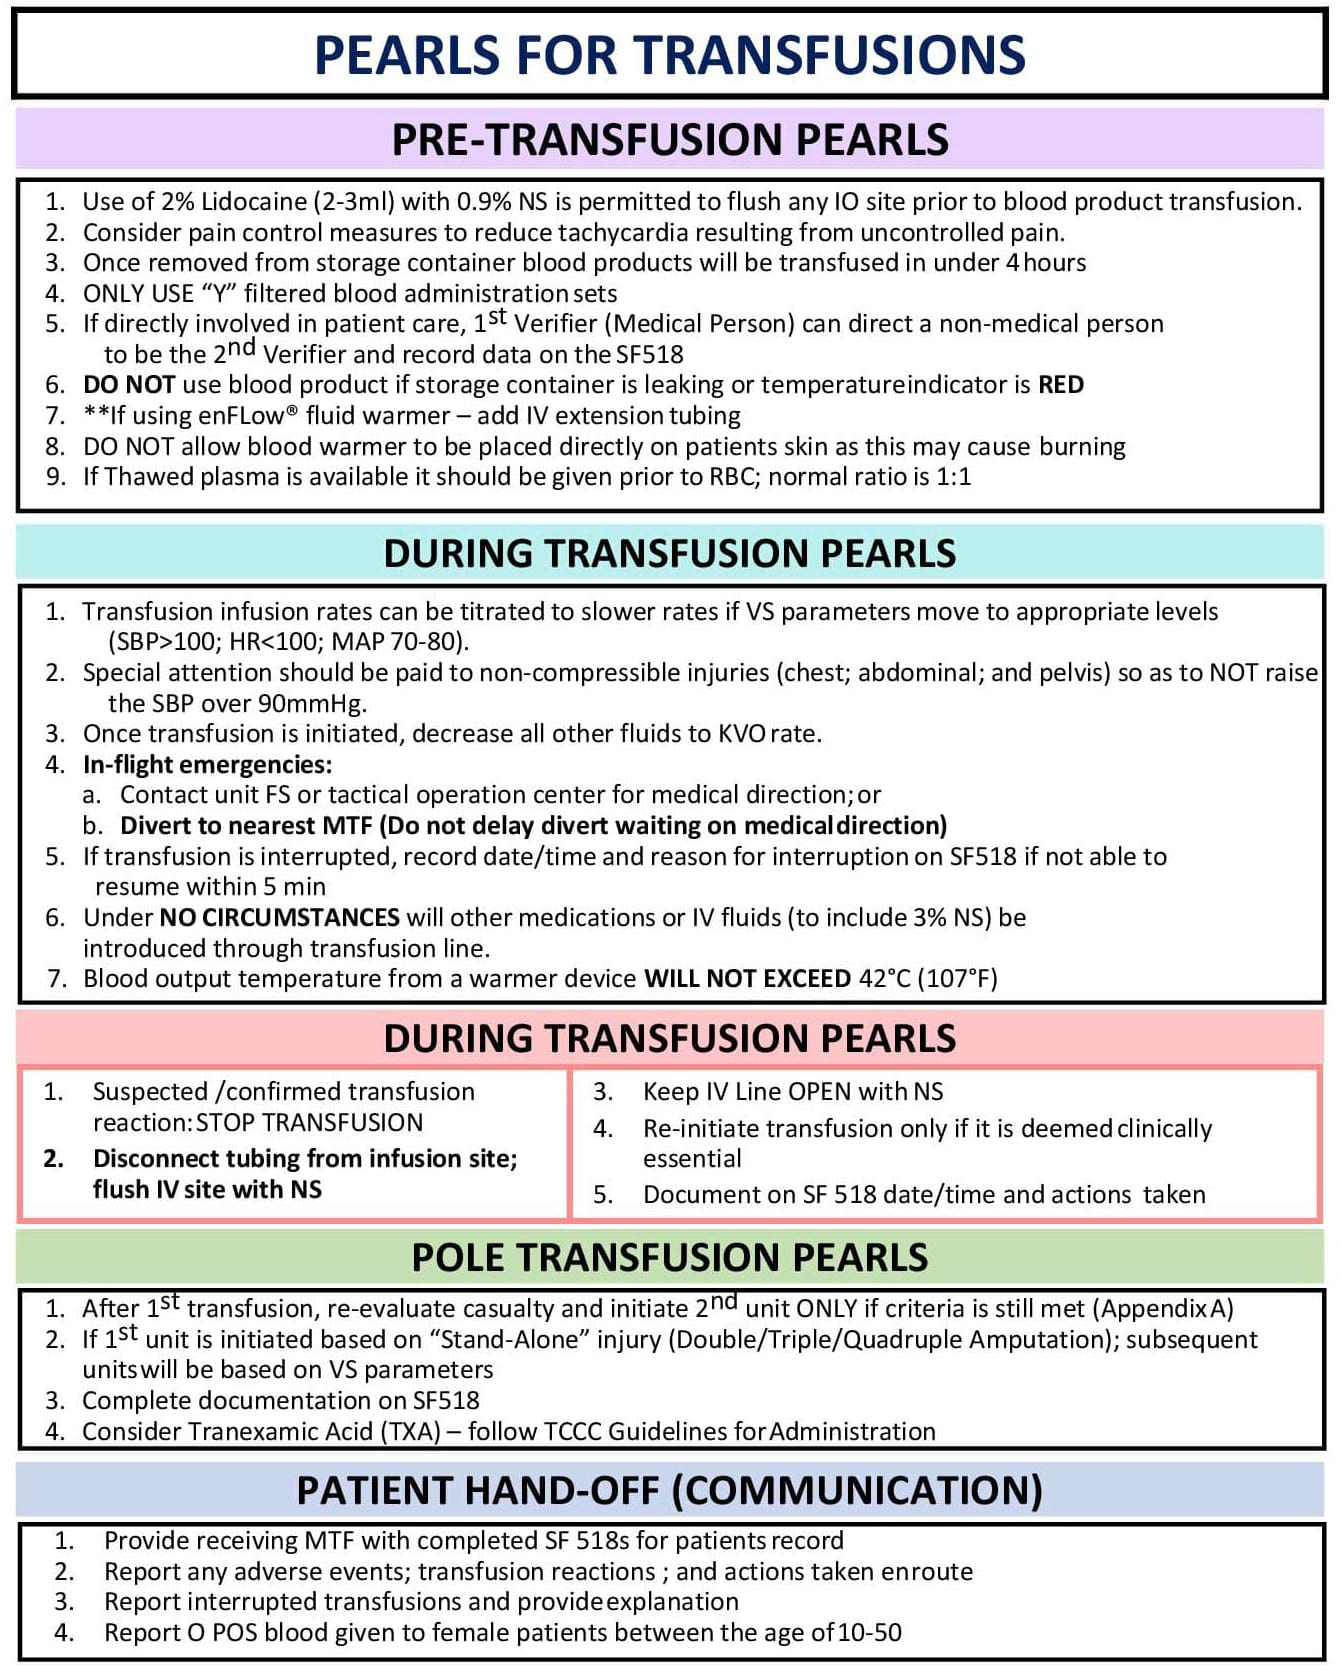 Pearls for Transfusions